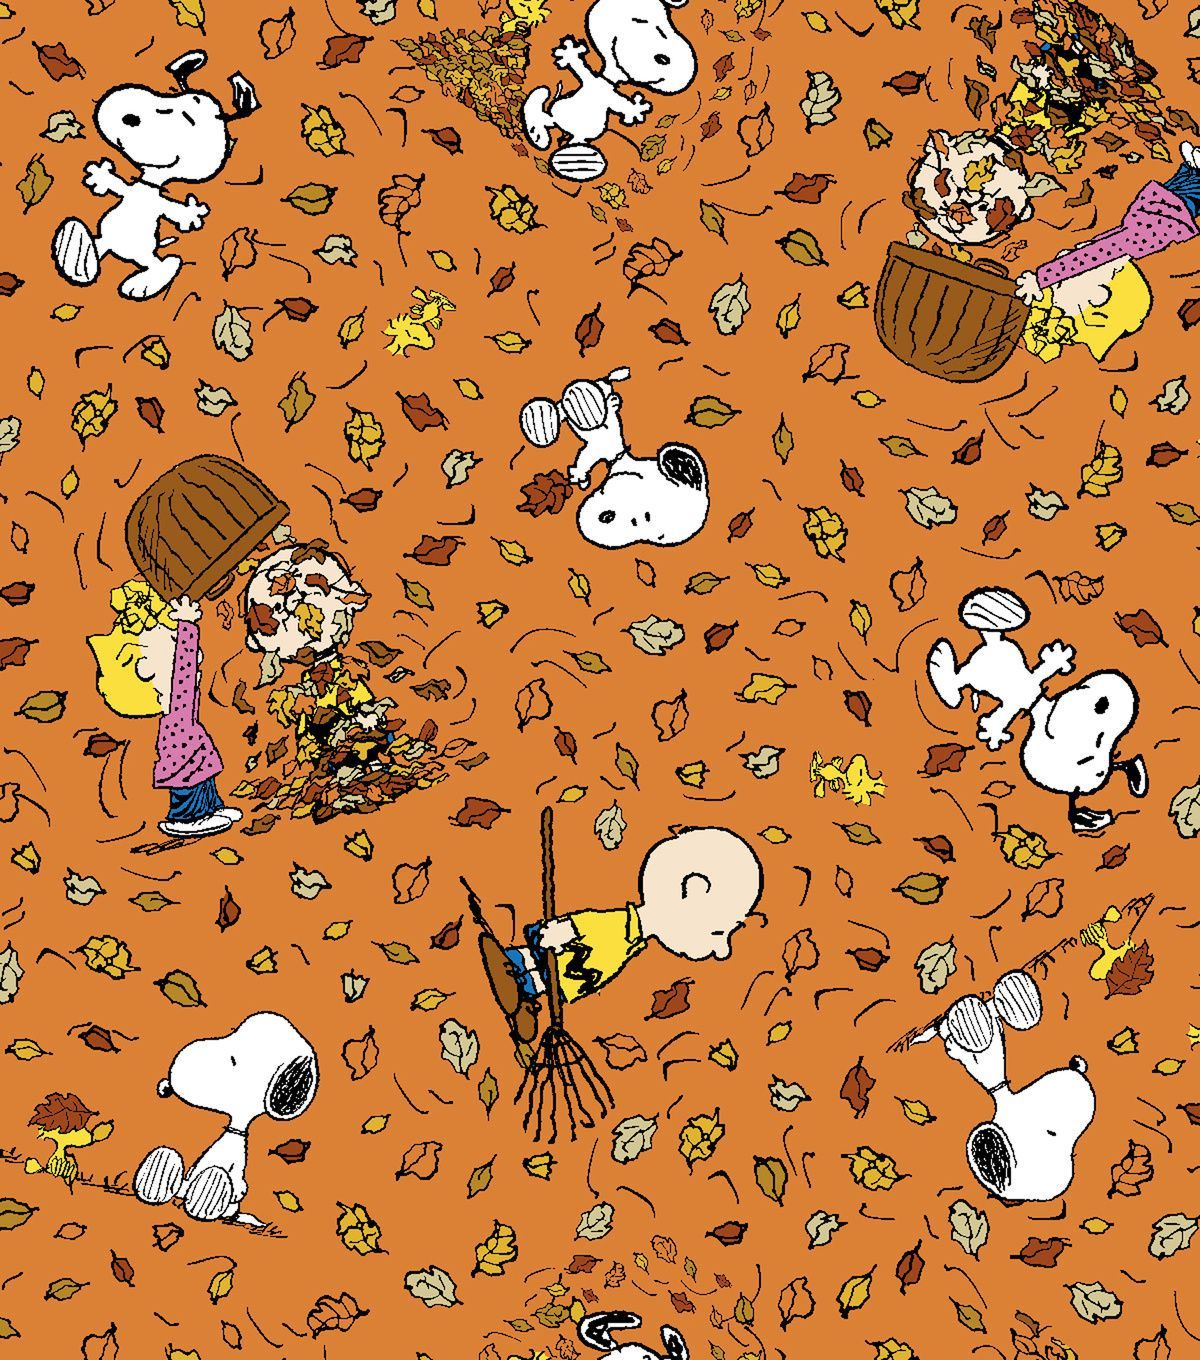 Harvest Cotton Fabric 43 Peanuts Falling Leaves. Thanksgiving Wallpaper, Printing On Fabric, Holiday Fabric